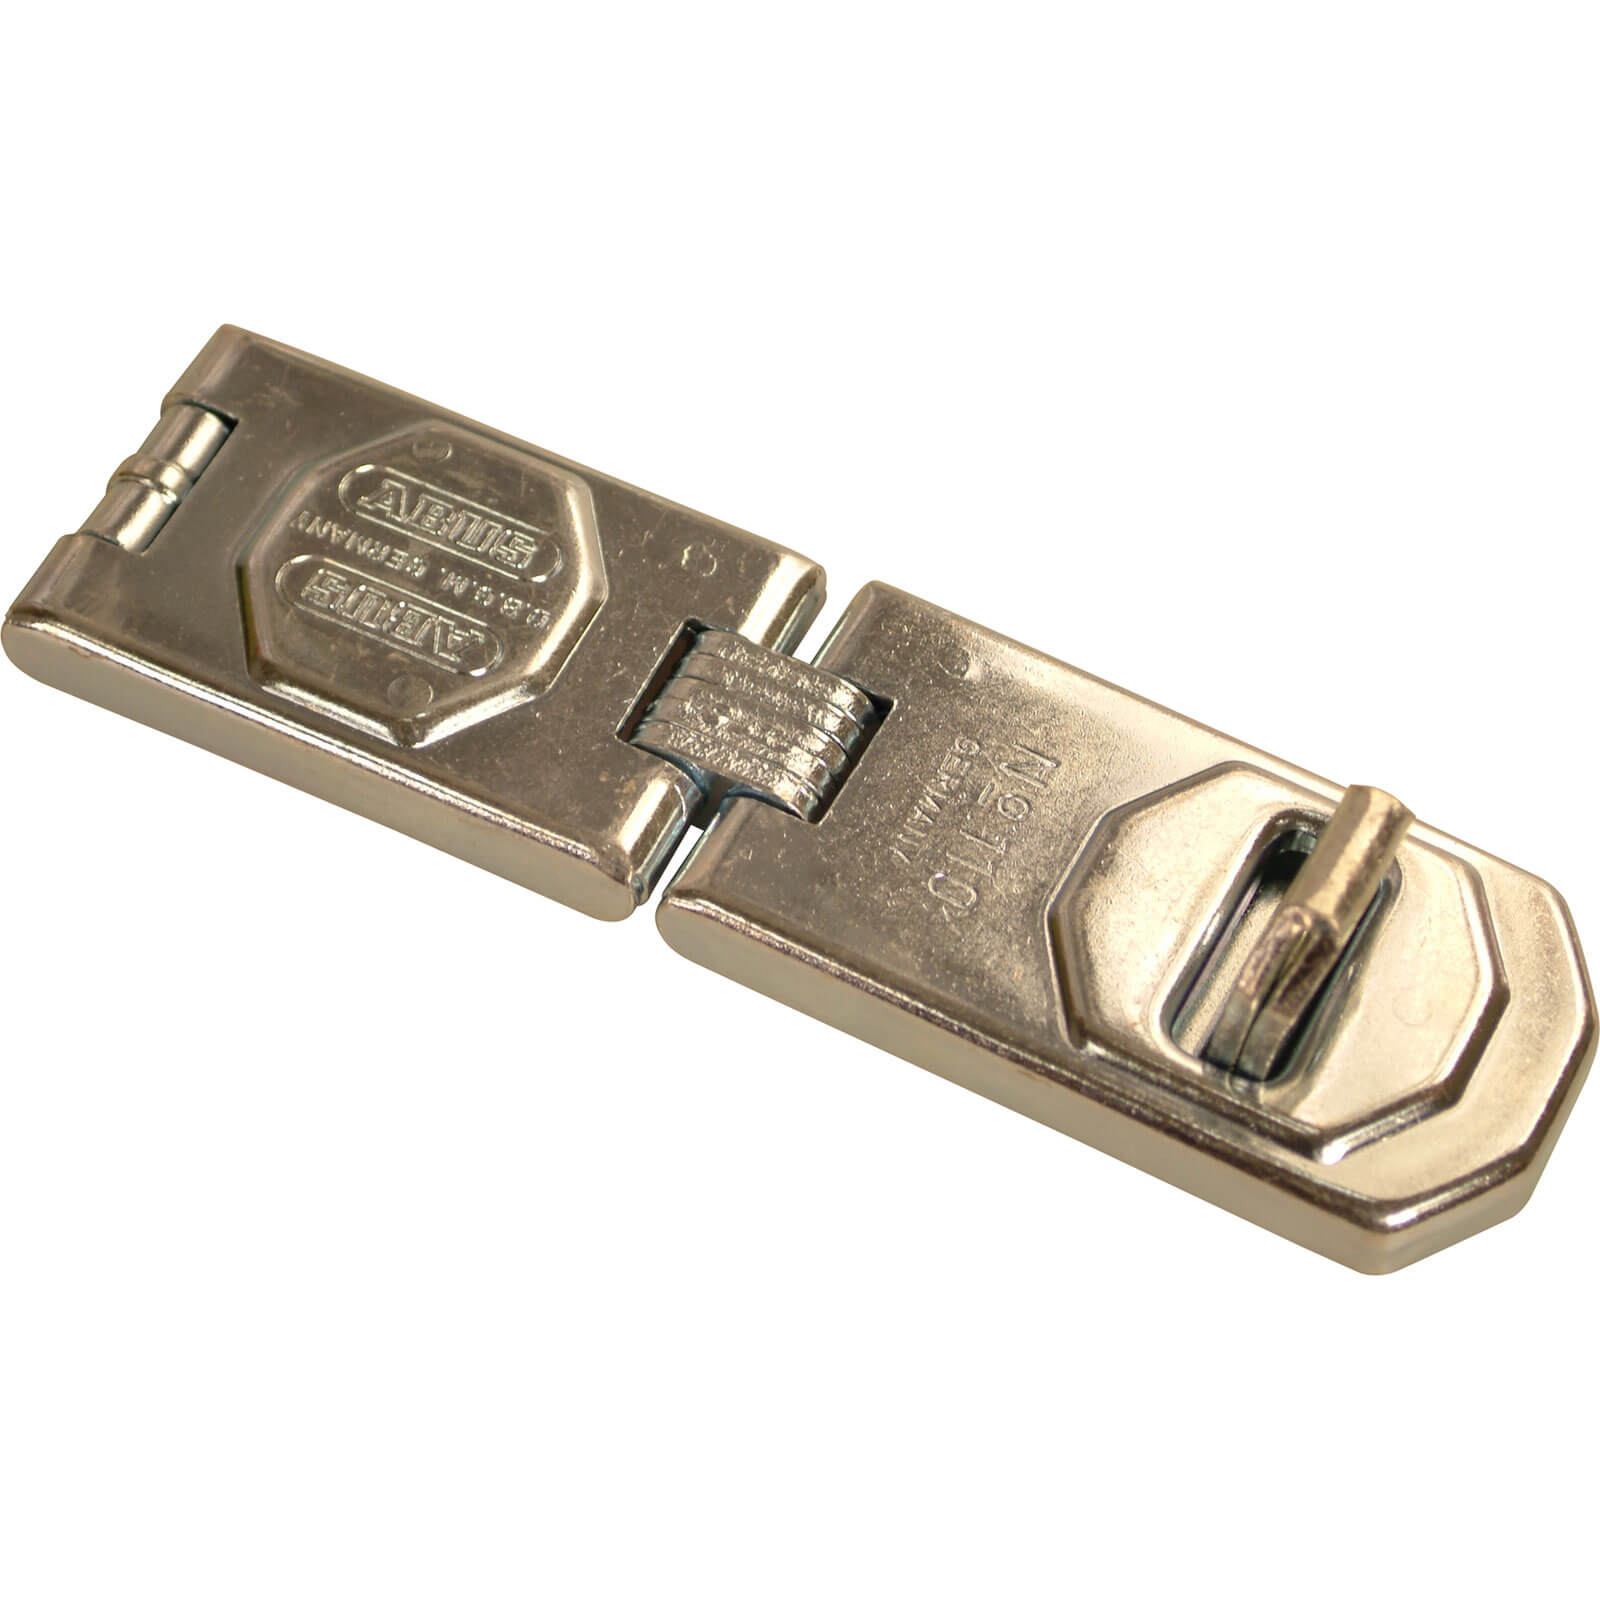 Image of Abus 110 Series Universal Hasp and Staple 115mm Single Jointed